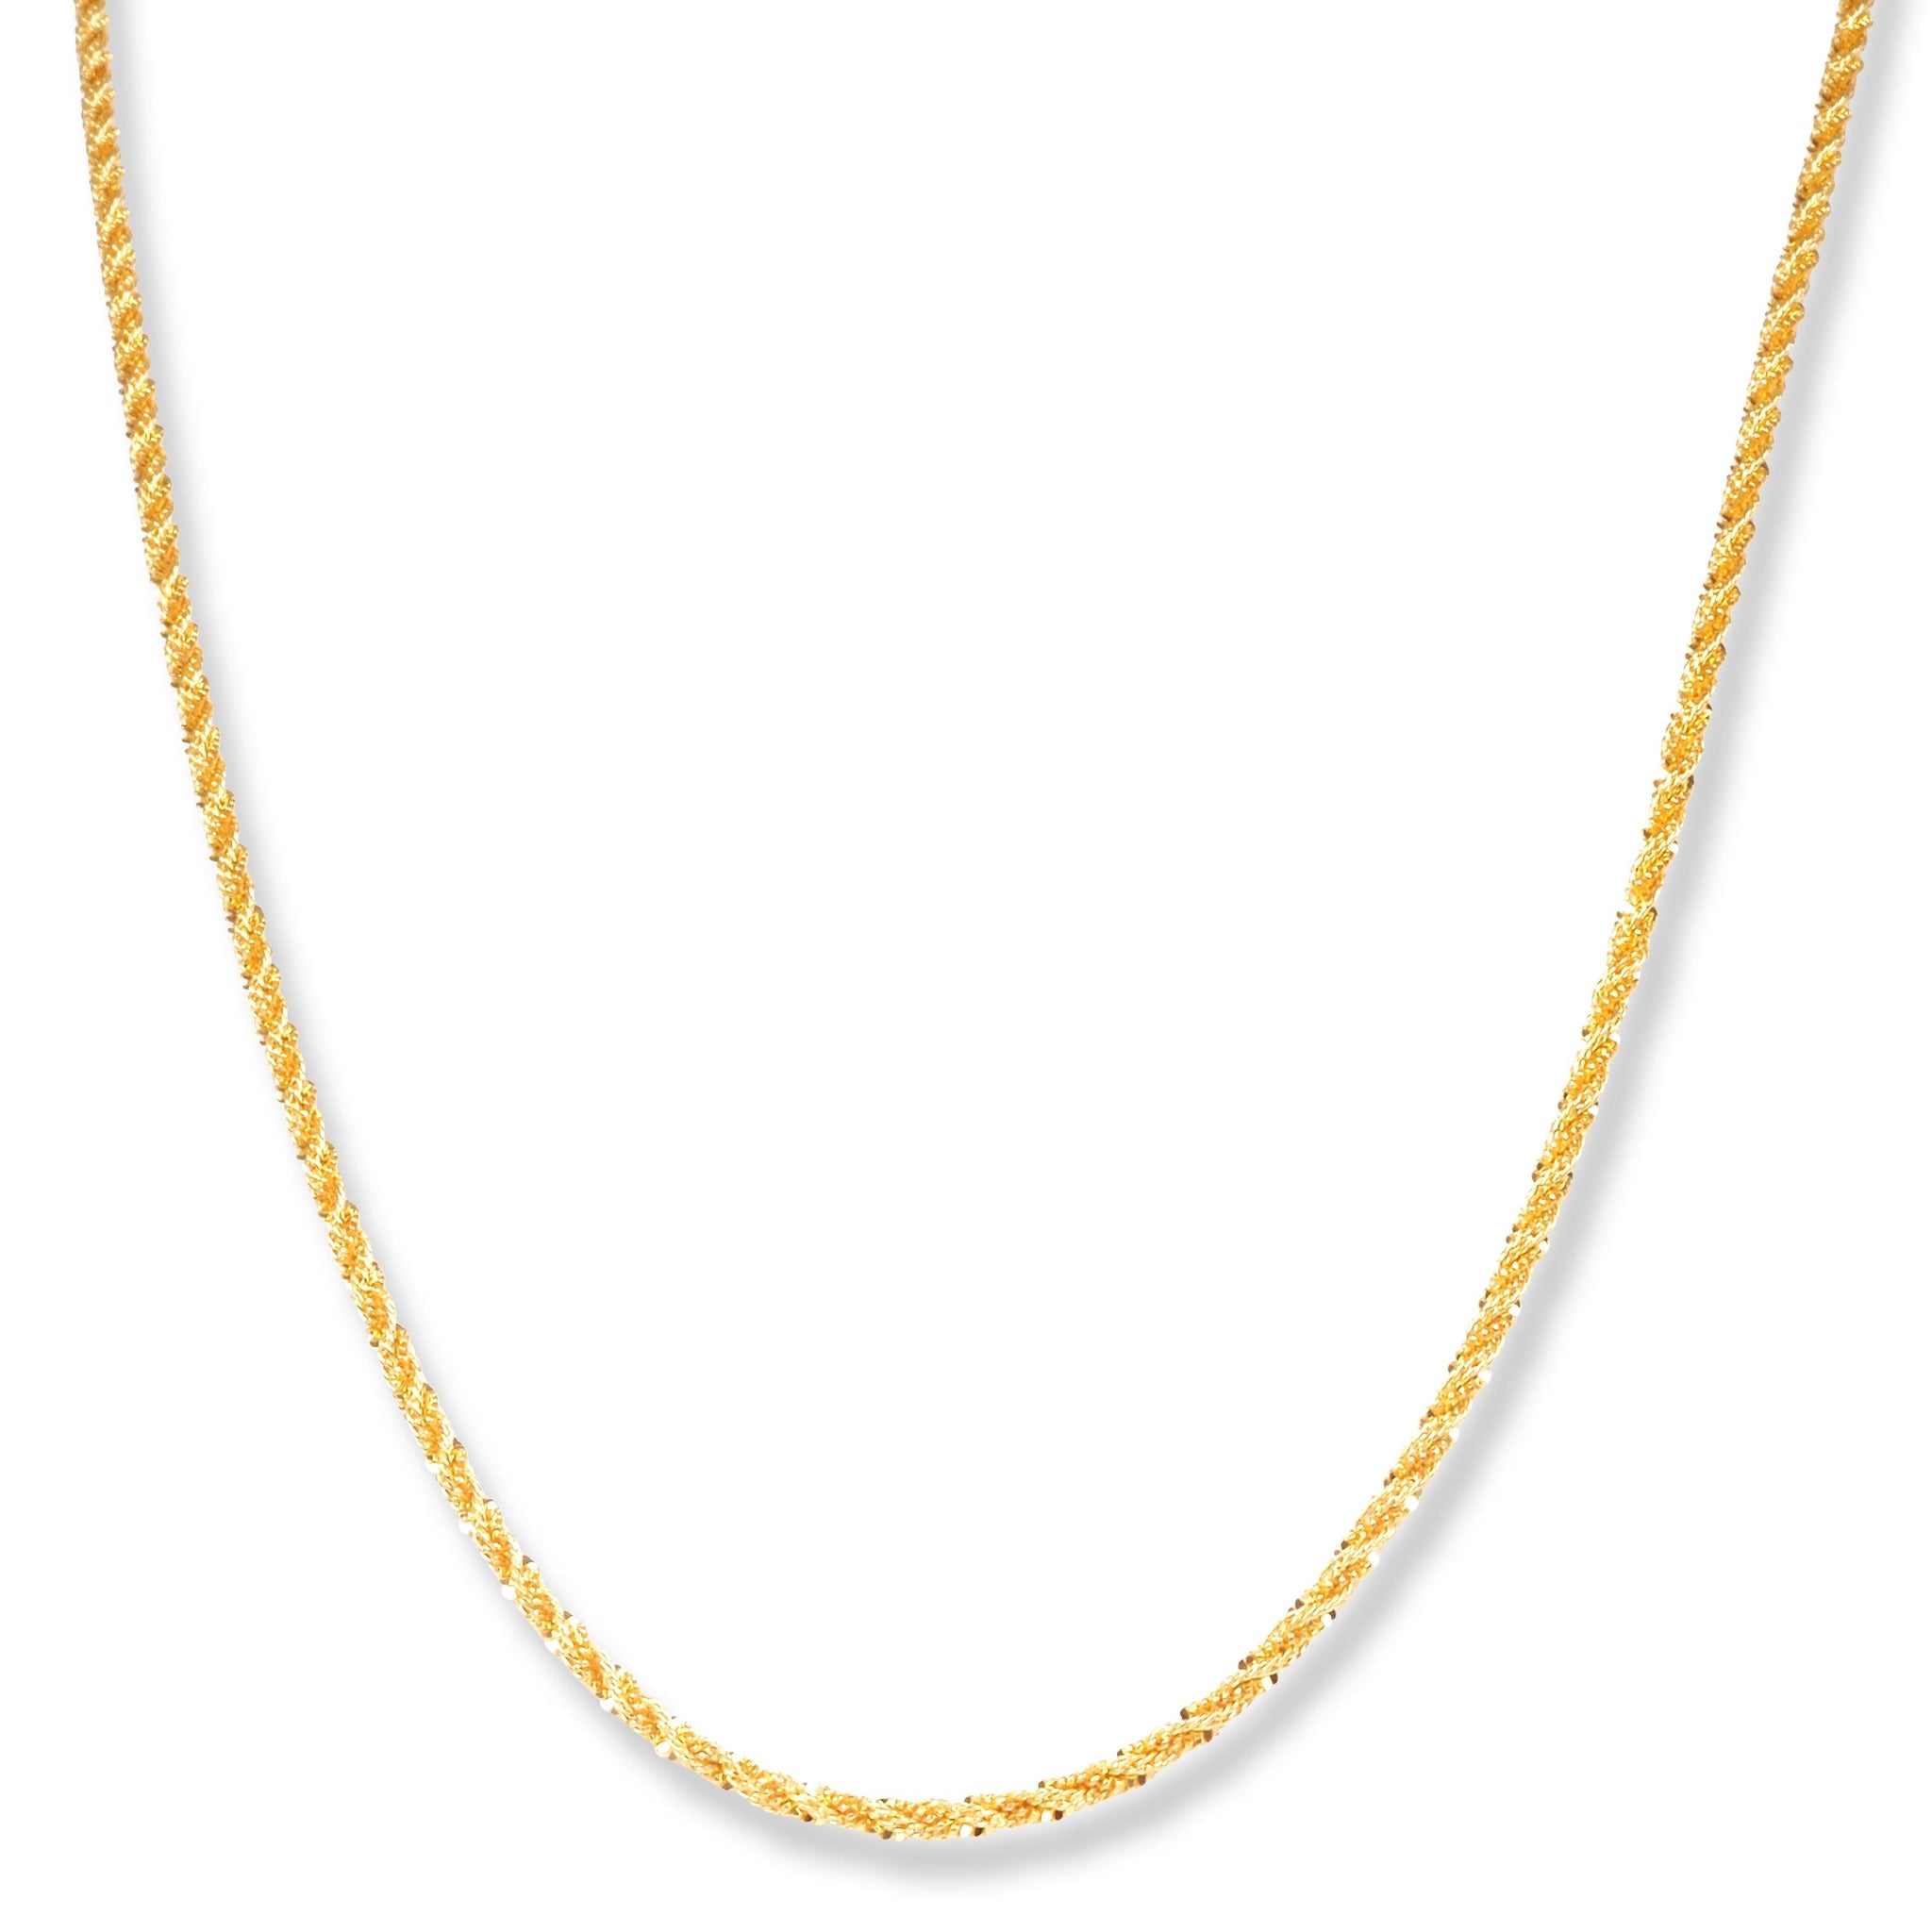 22ct Gold Fancy Rope Chain with Lobster Clasp C-4747